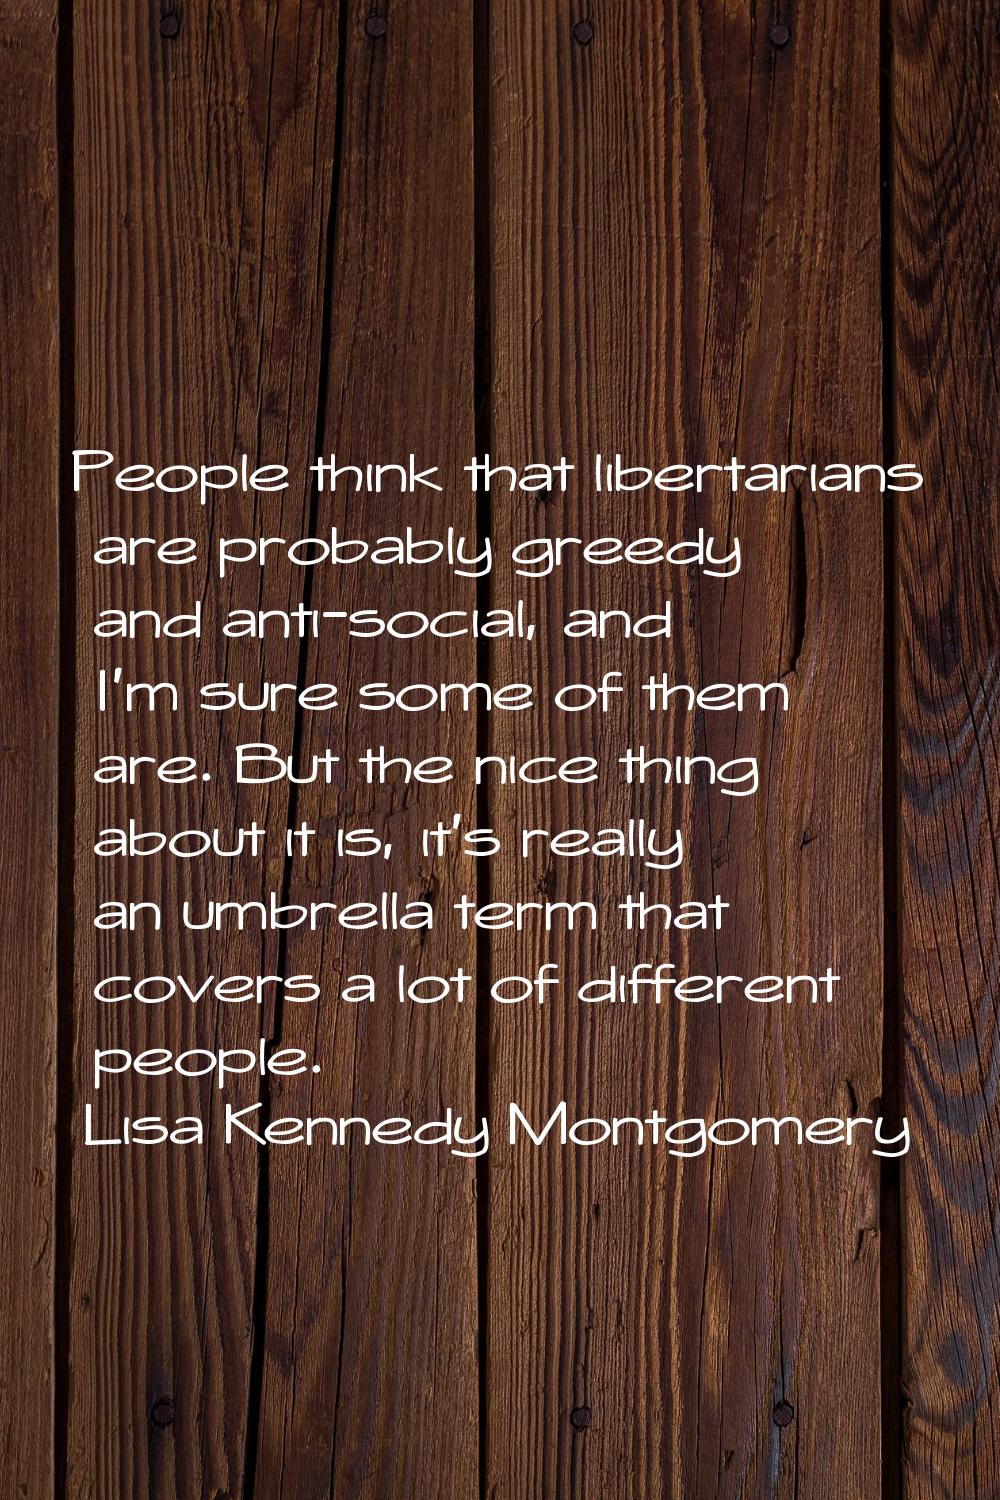 People think that libertarians are probably greedy and anti-social, and I'm sure some of them are. 